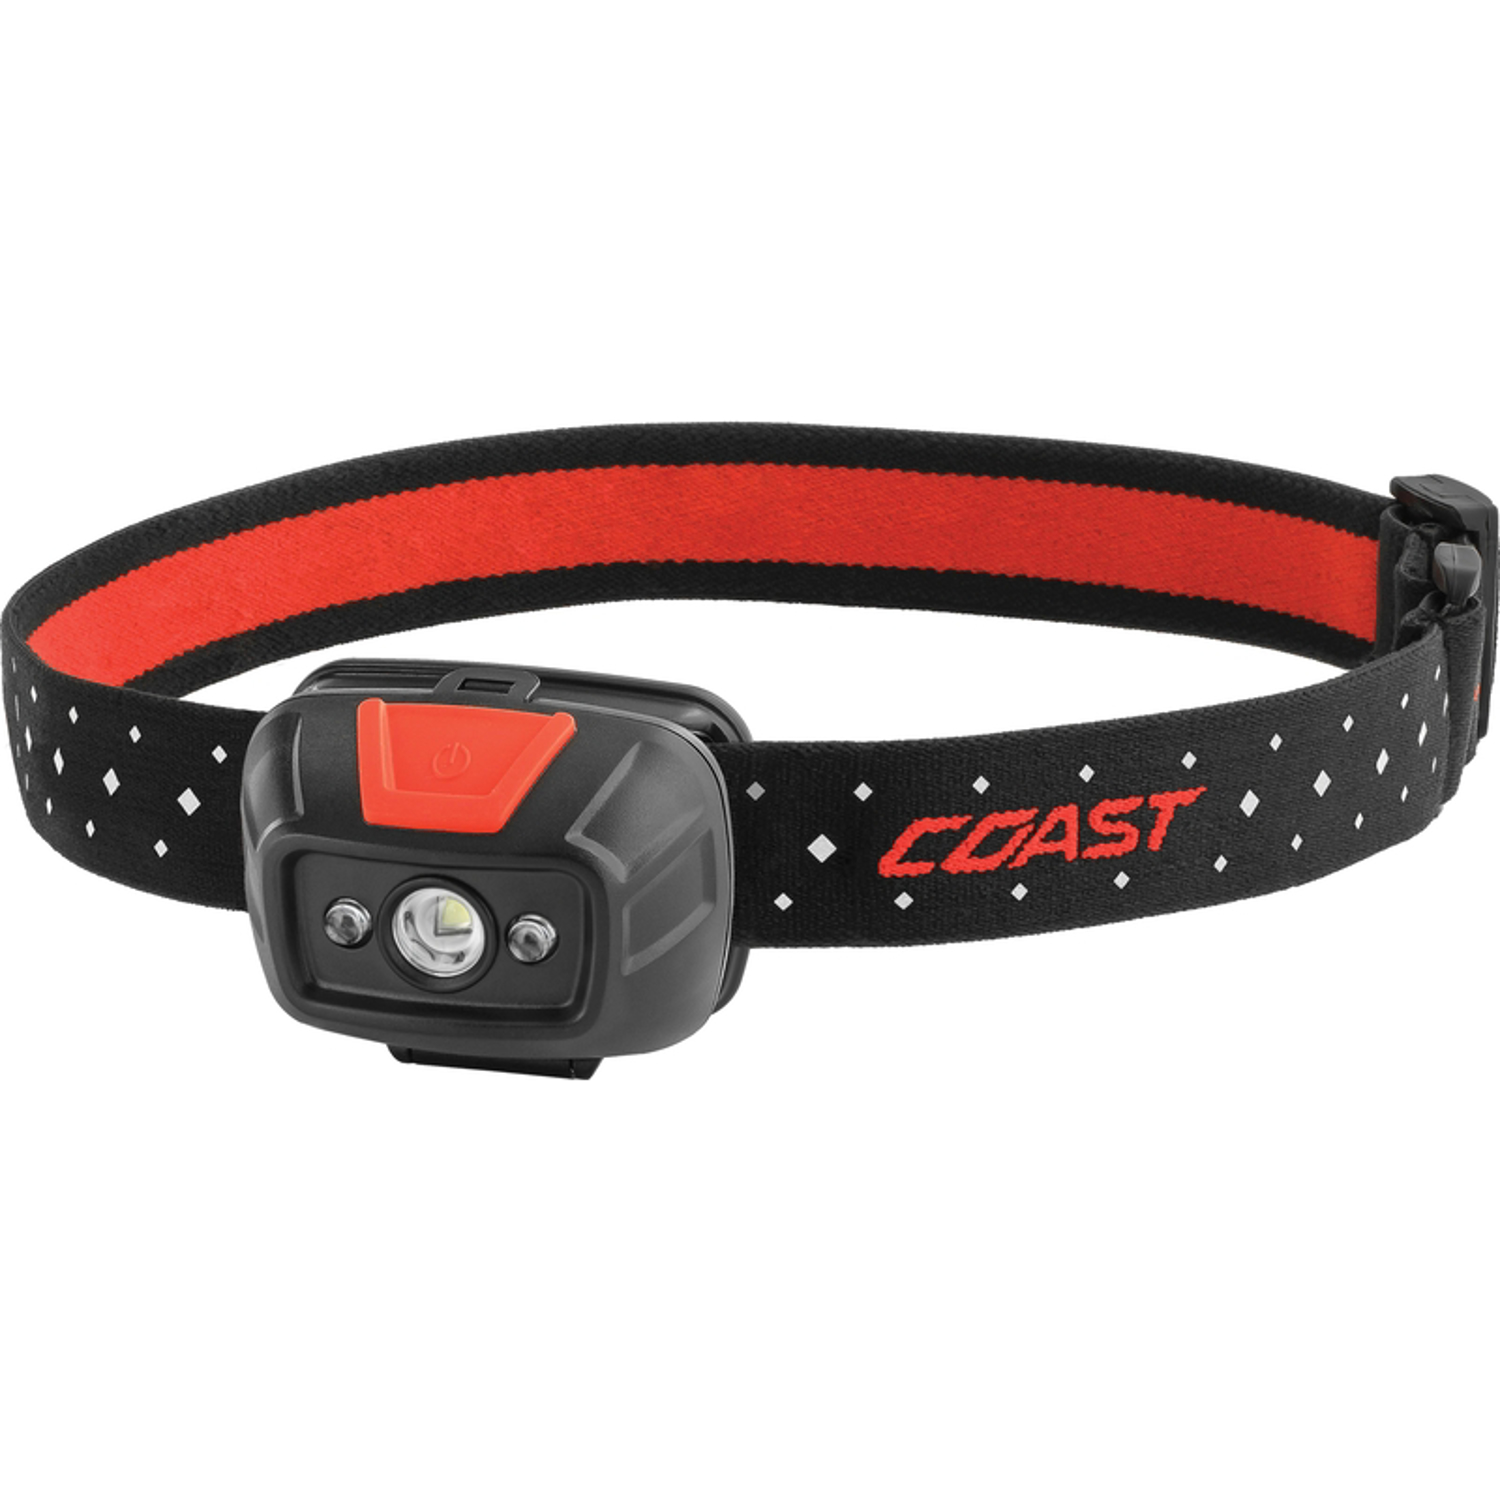 Photos - Torch Coast FL19 330 lm Black/Red LED Head Lamp AAA Battery 21586 